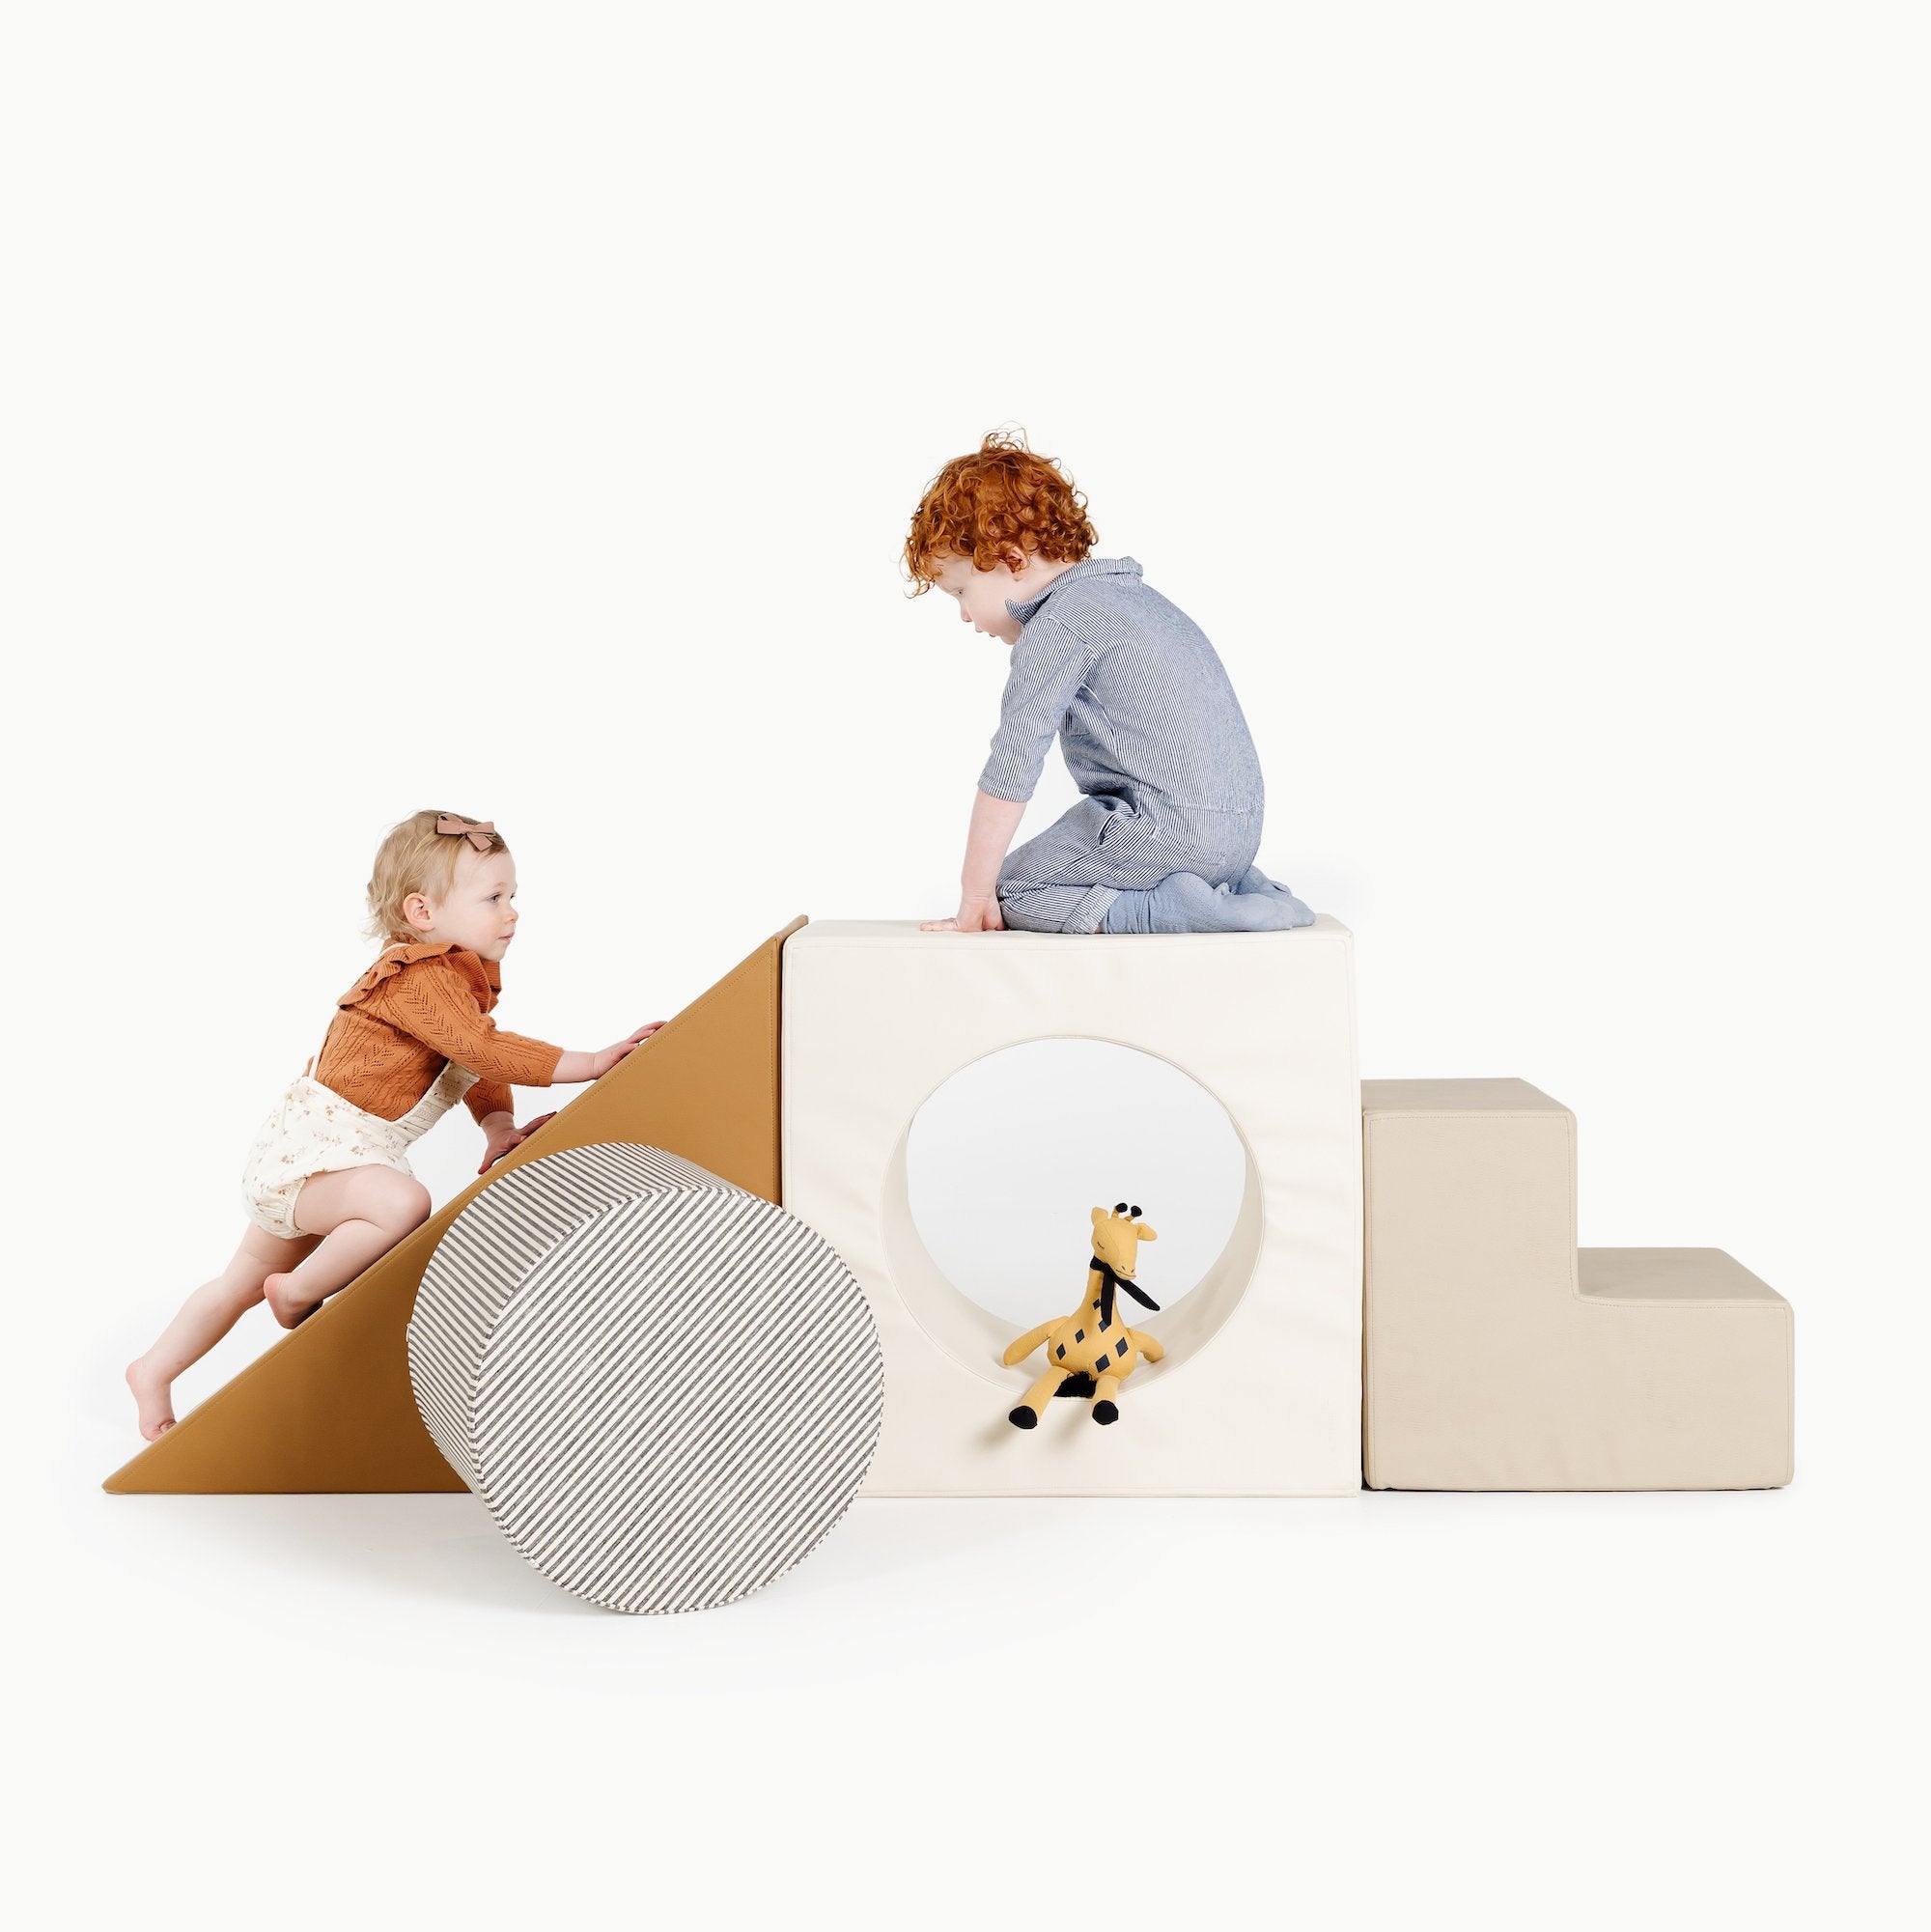 Camel • Ivory • Stone Stripe • Millet@Kid playing on the Camel Block Playset